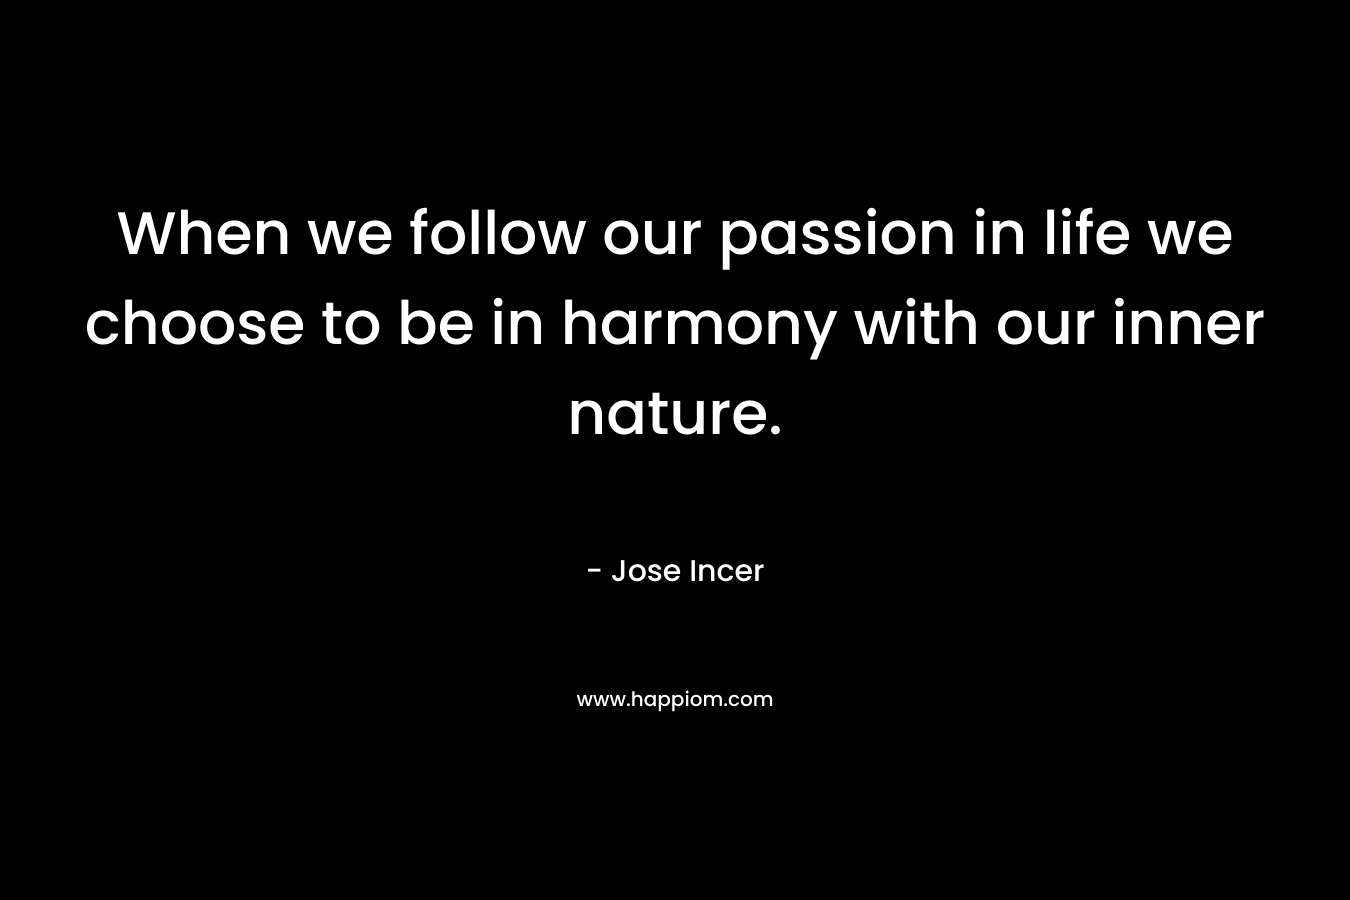 When we follow our passion in life we choose to be in harmony with our inner nature.